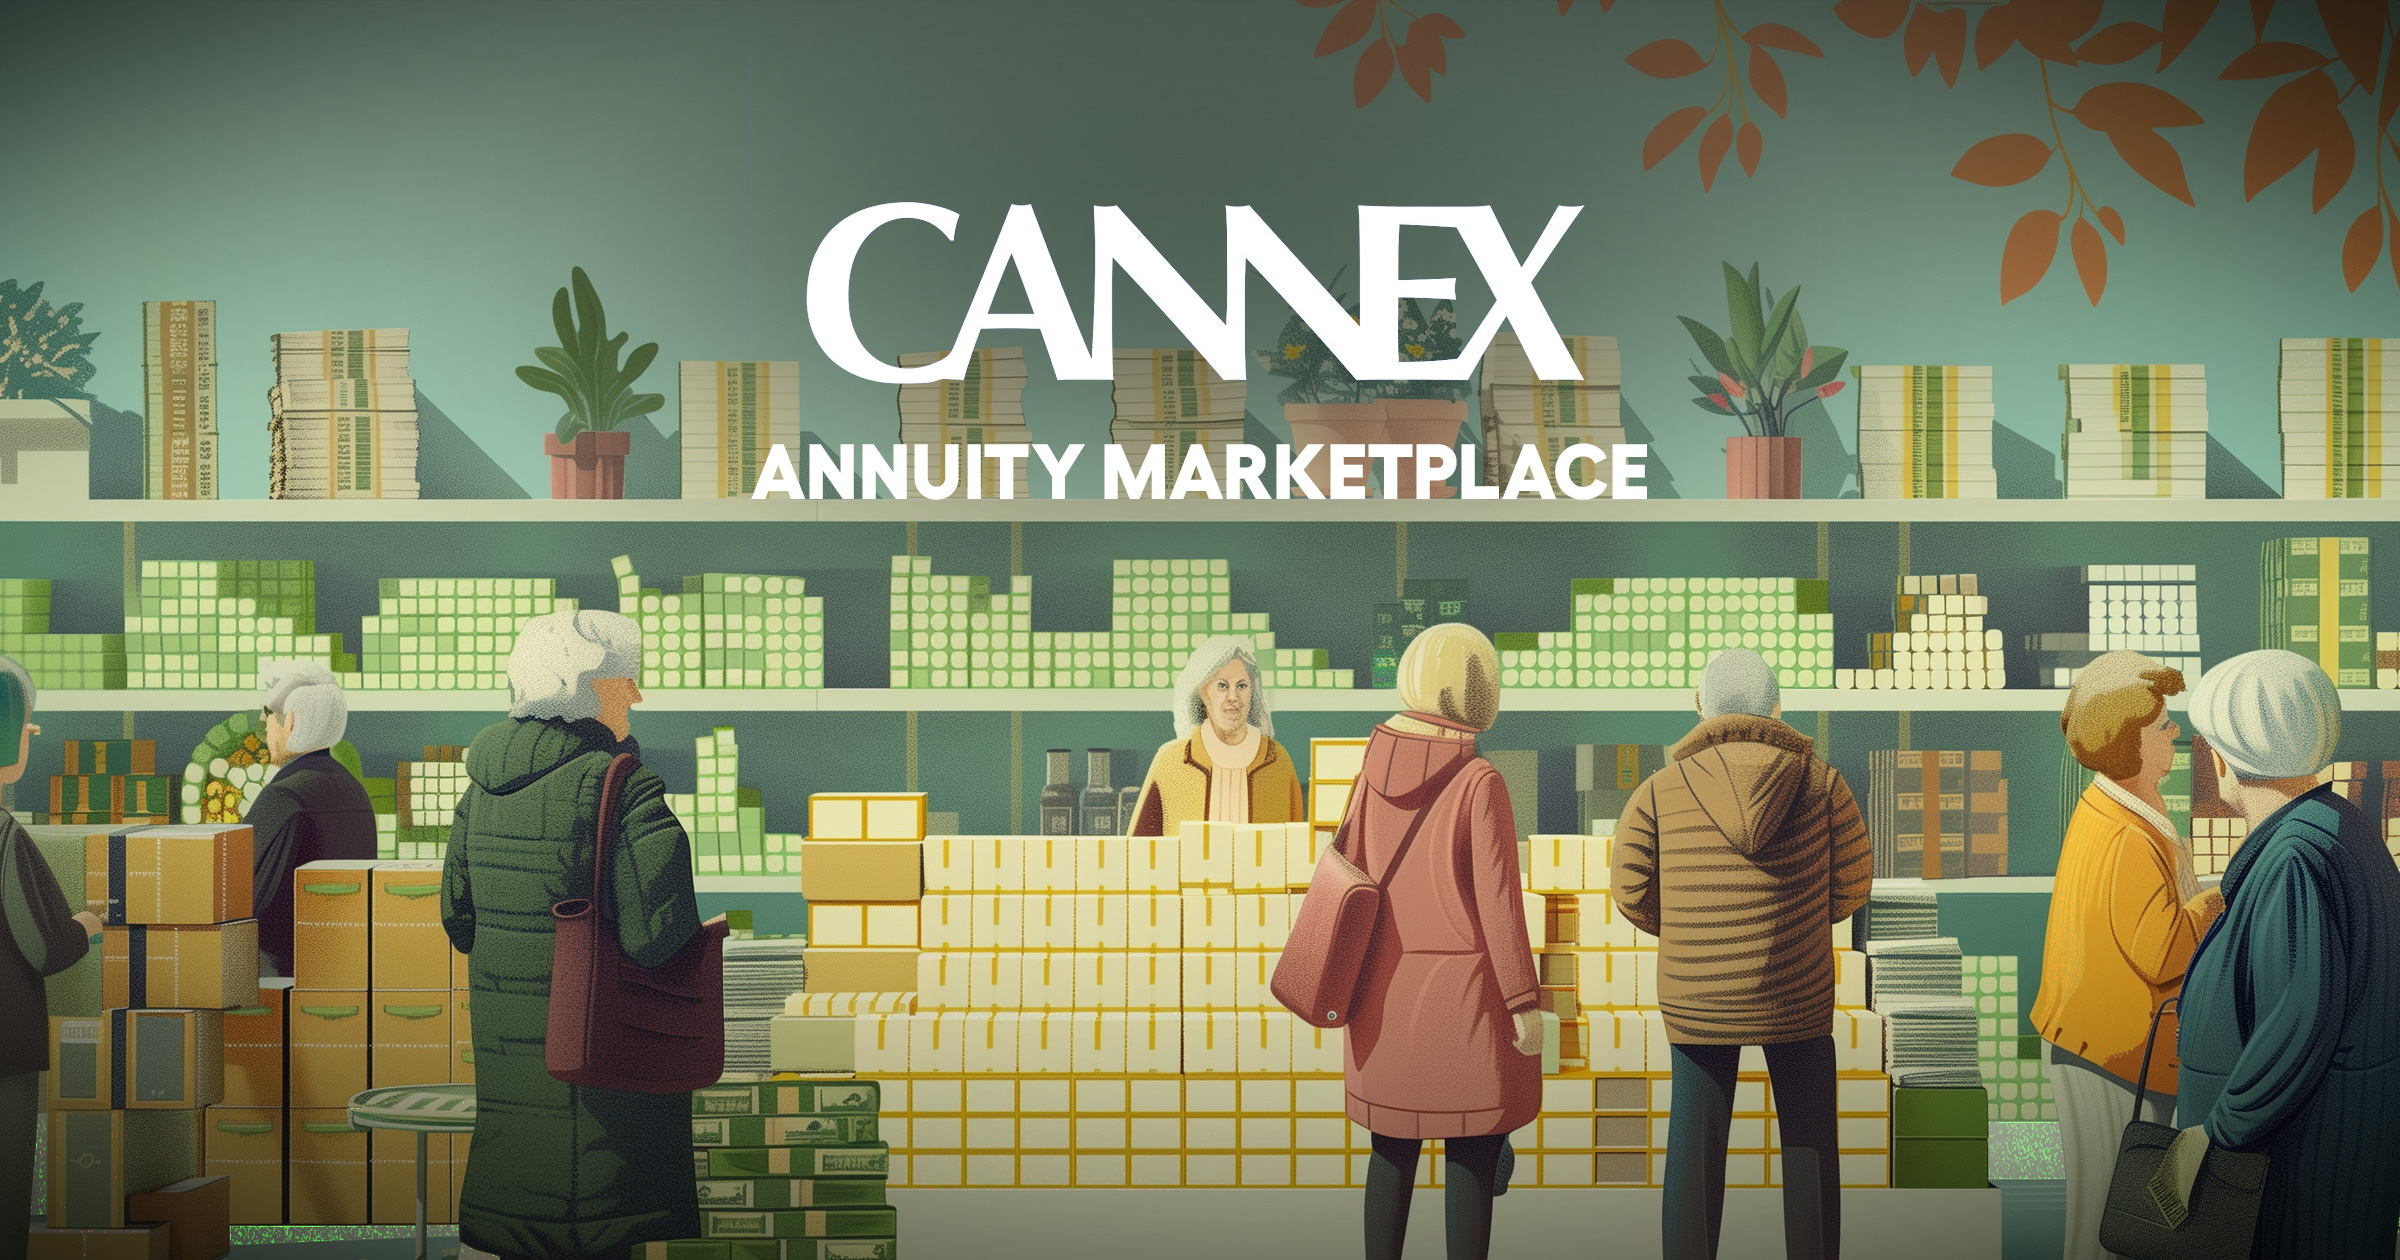 Illustration of people in a marketplace with the words "Cannex Annuity Marketplace" superimposed. CANNEX-Launches-Annuity-Marketplace.